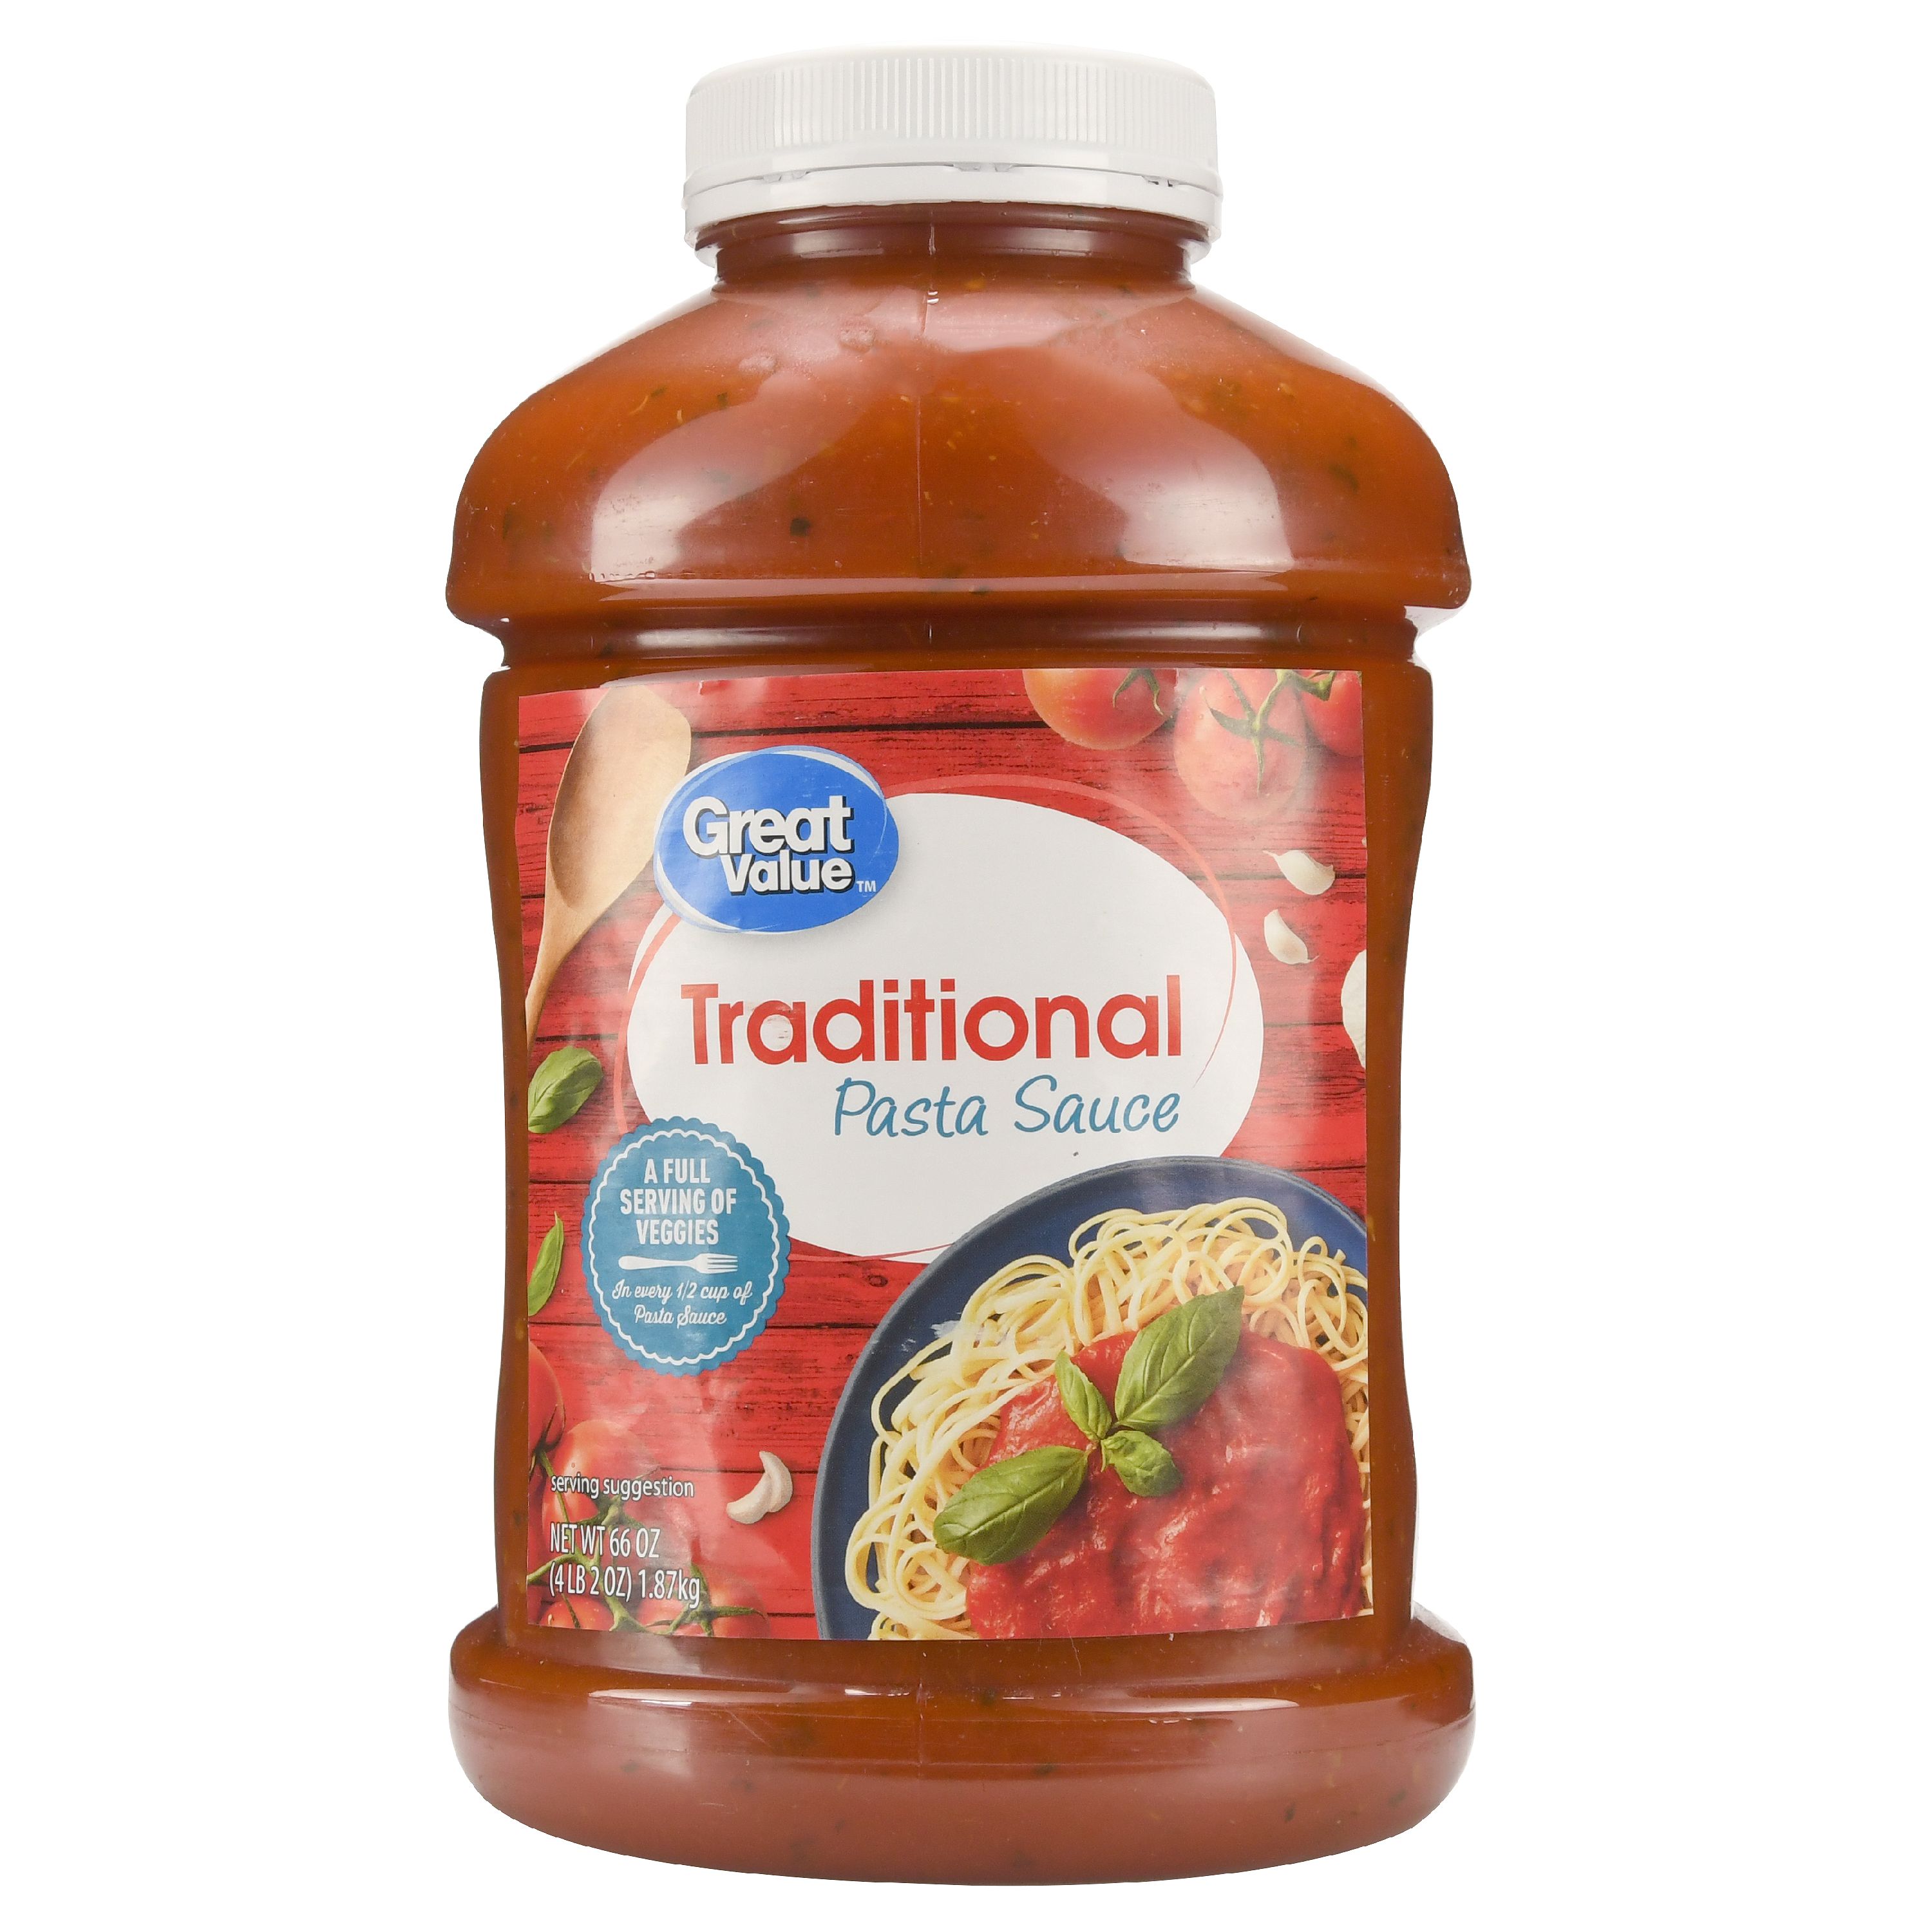 Great Value Traditional Pasta Sauce, 66 oz - image 1 of 4